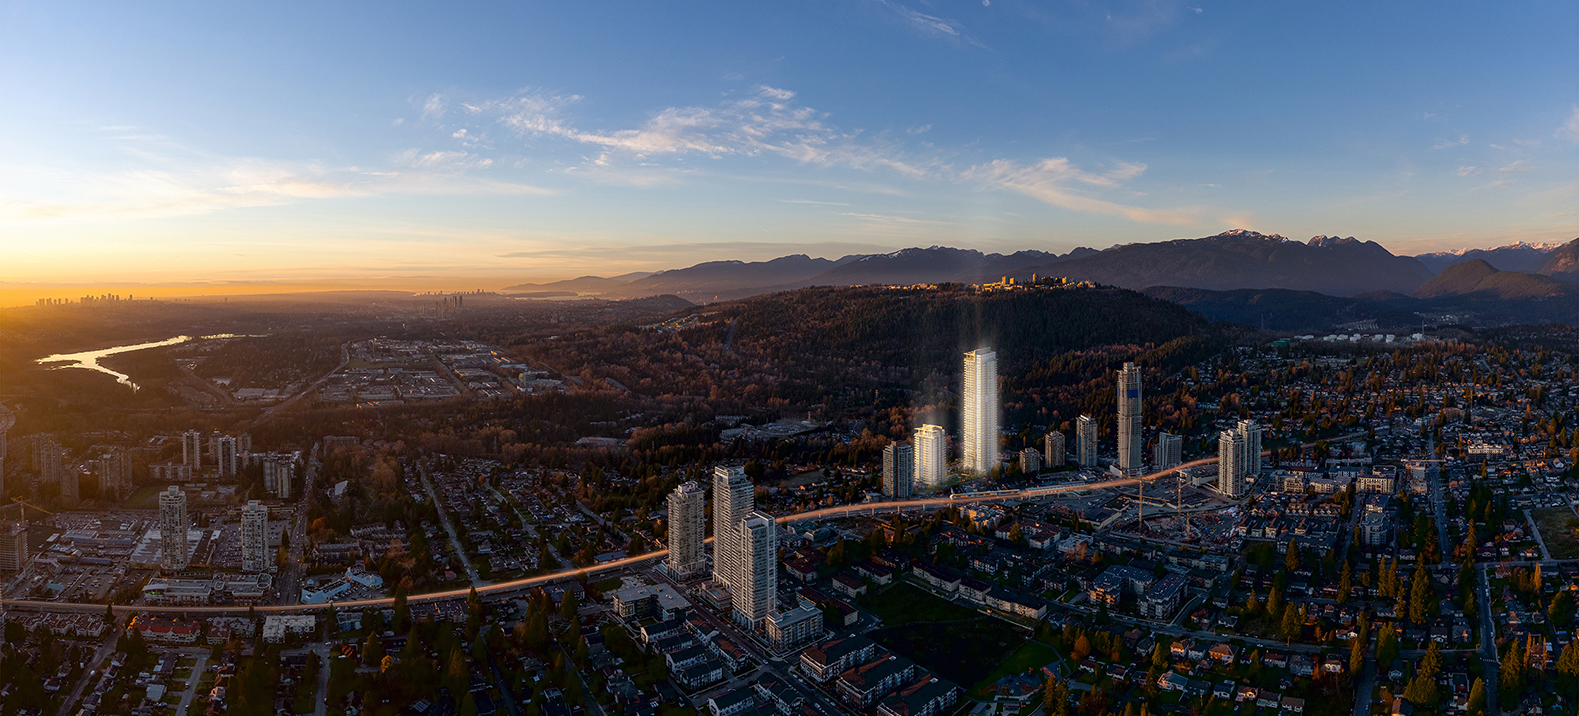 West Coquitlam aerial view